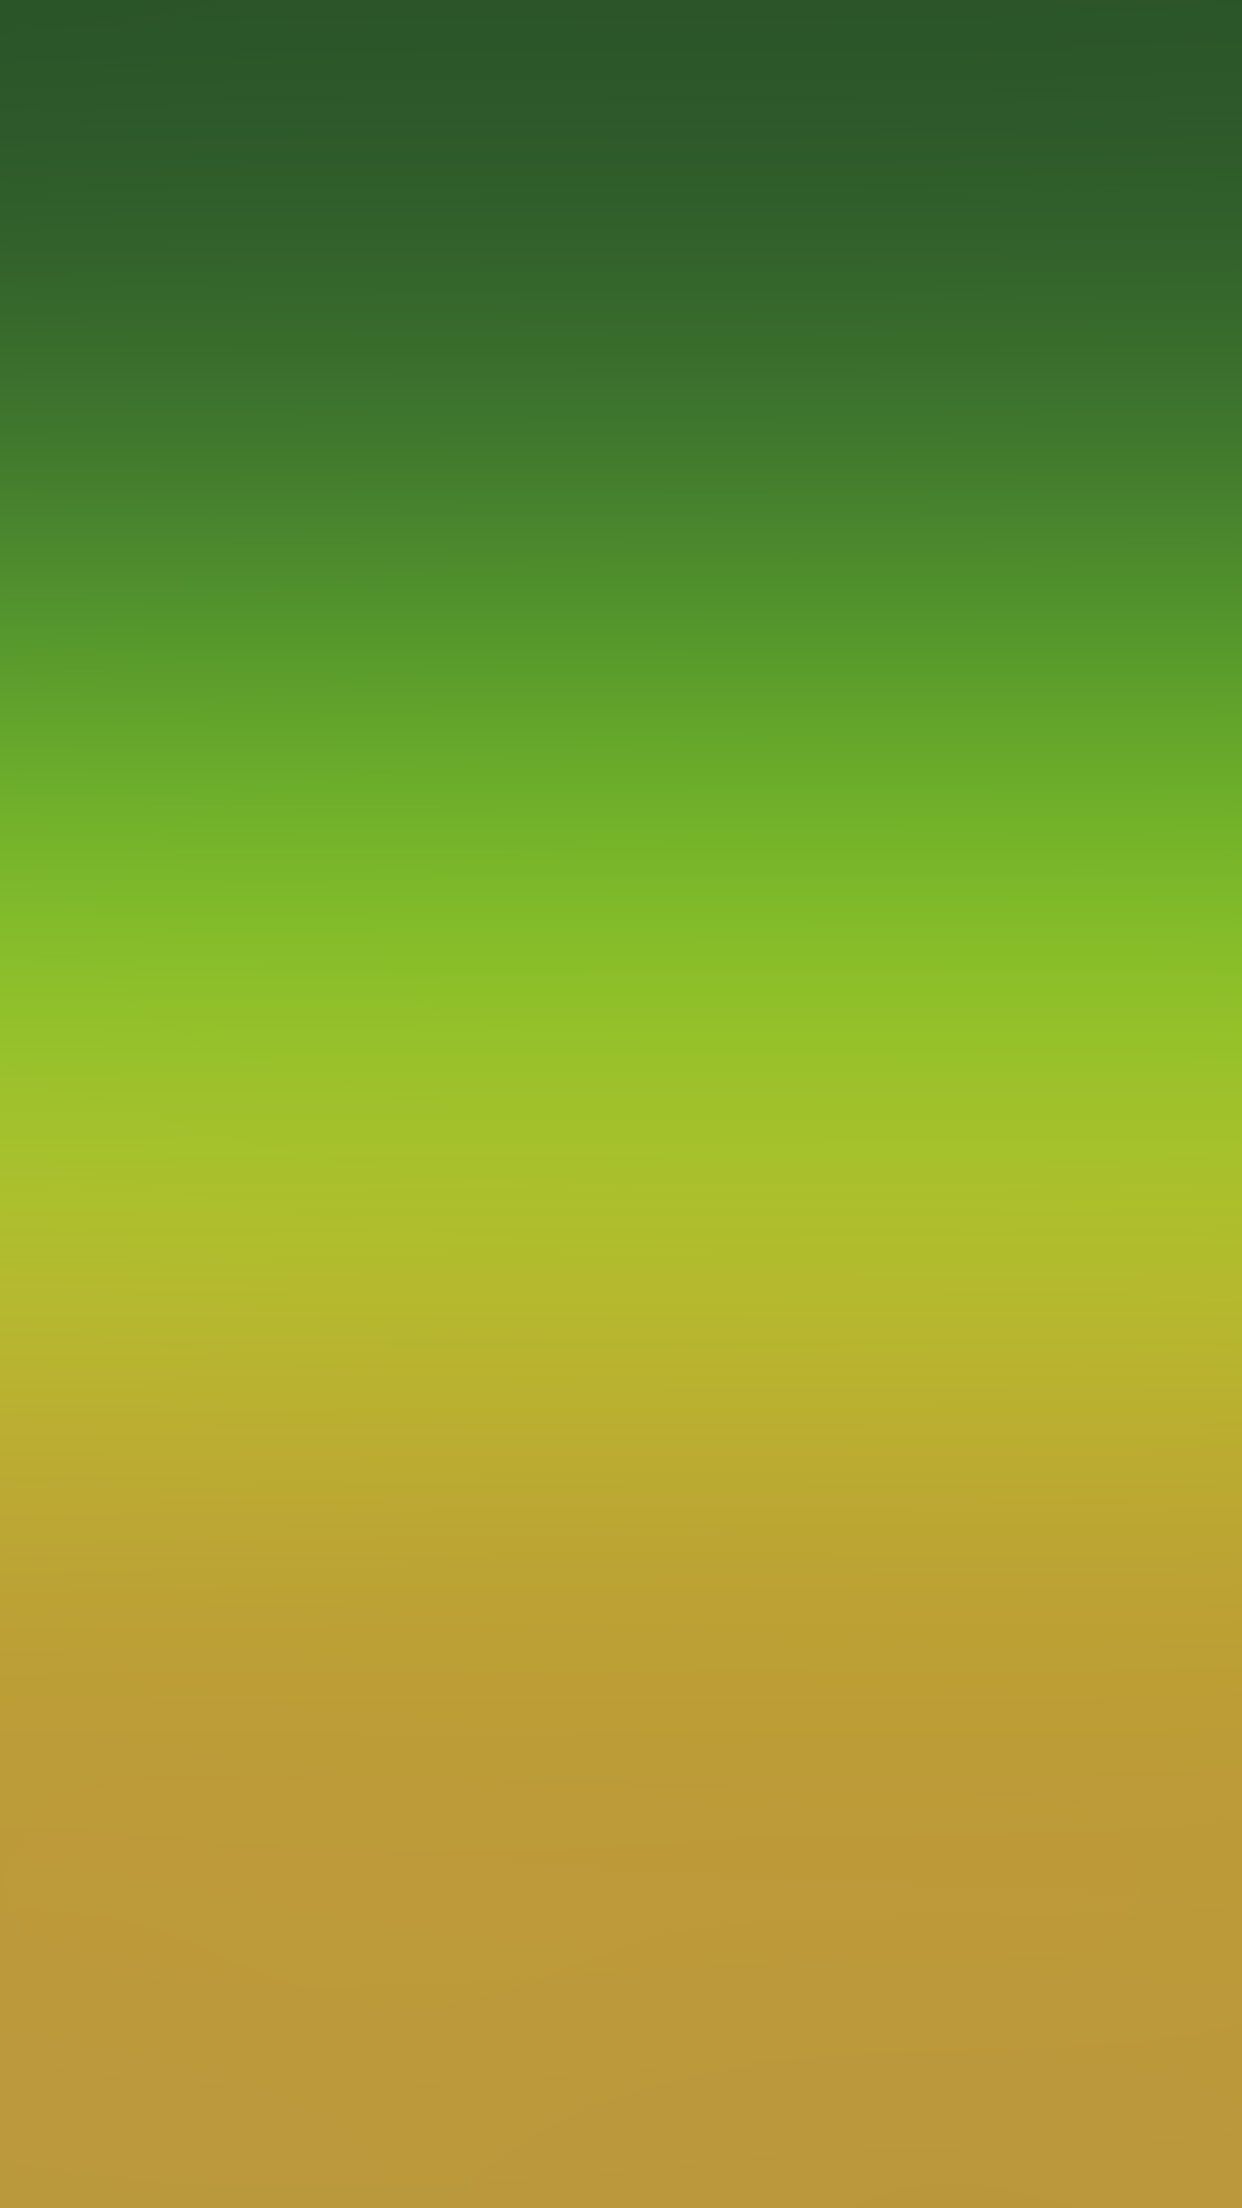 Green And Yellow Wallpaper iPhone